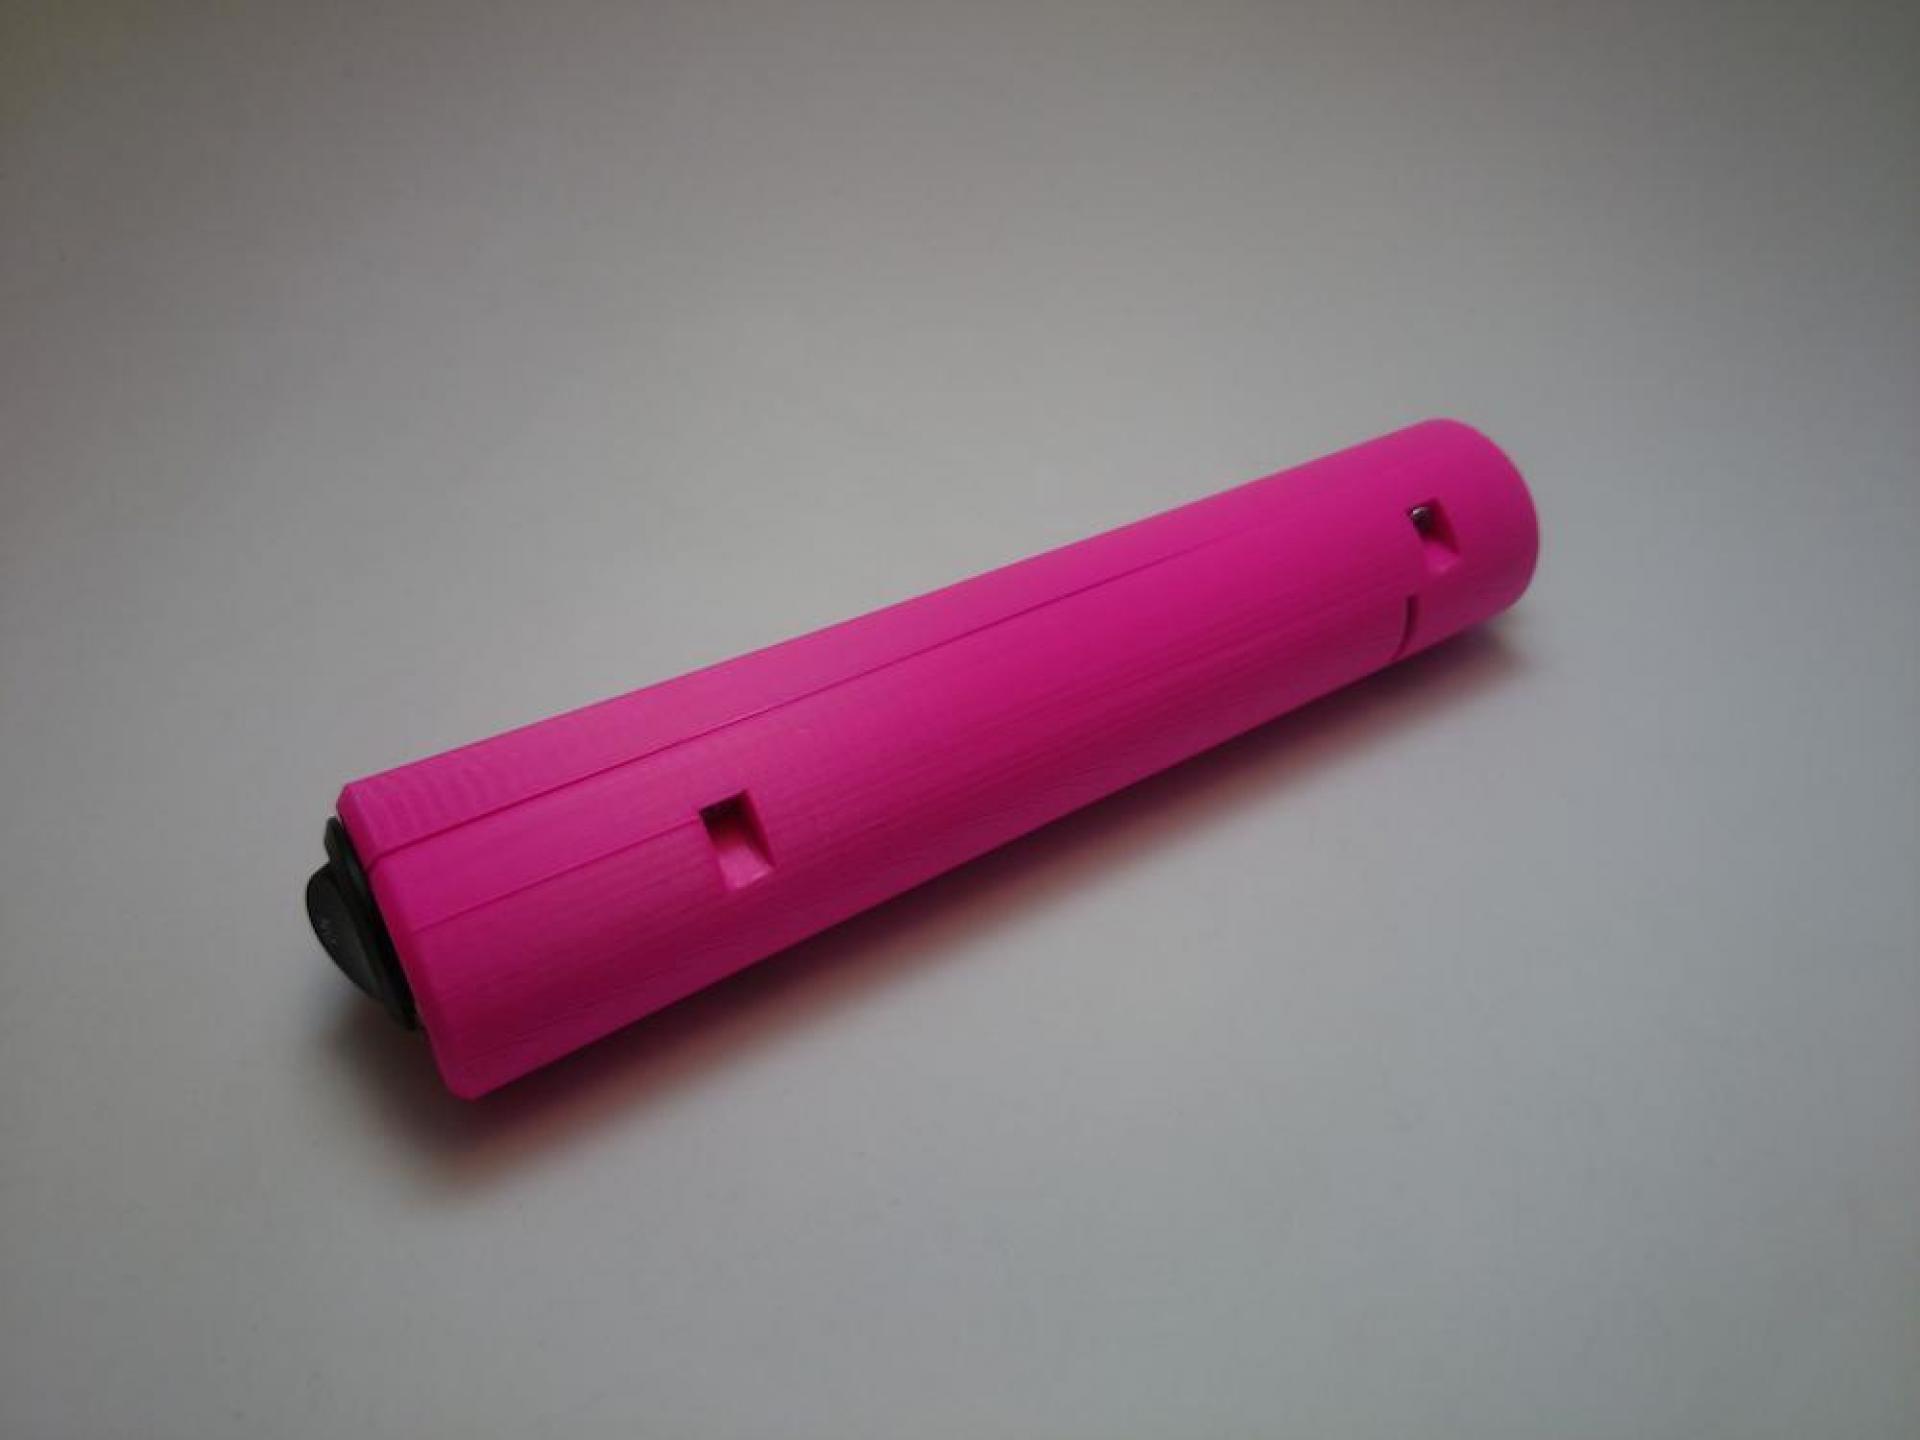 The final prototype of Vibrette. A long pink stick with a switch on the bottom and a button on the top.